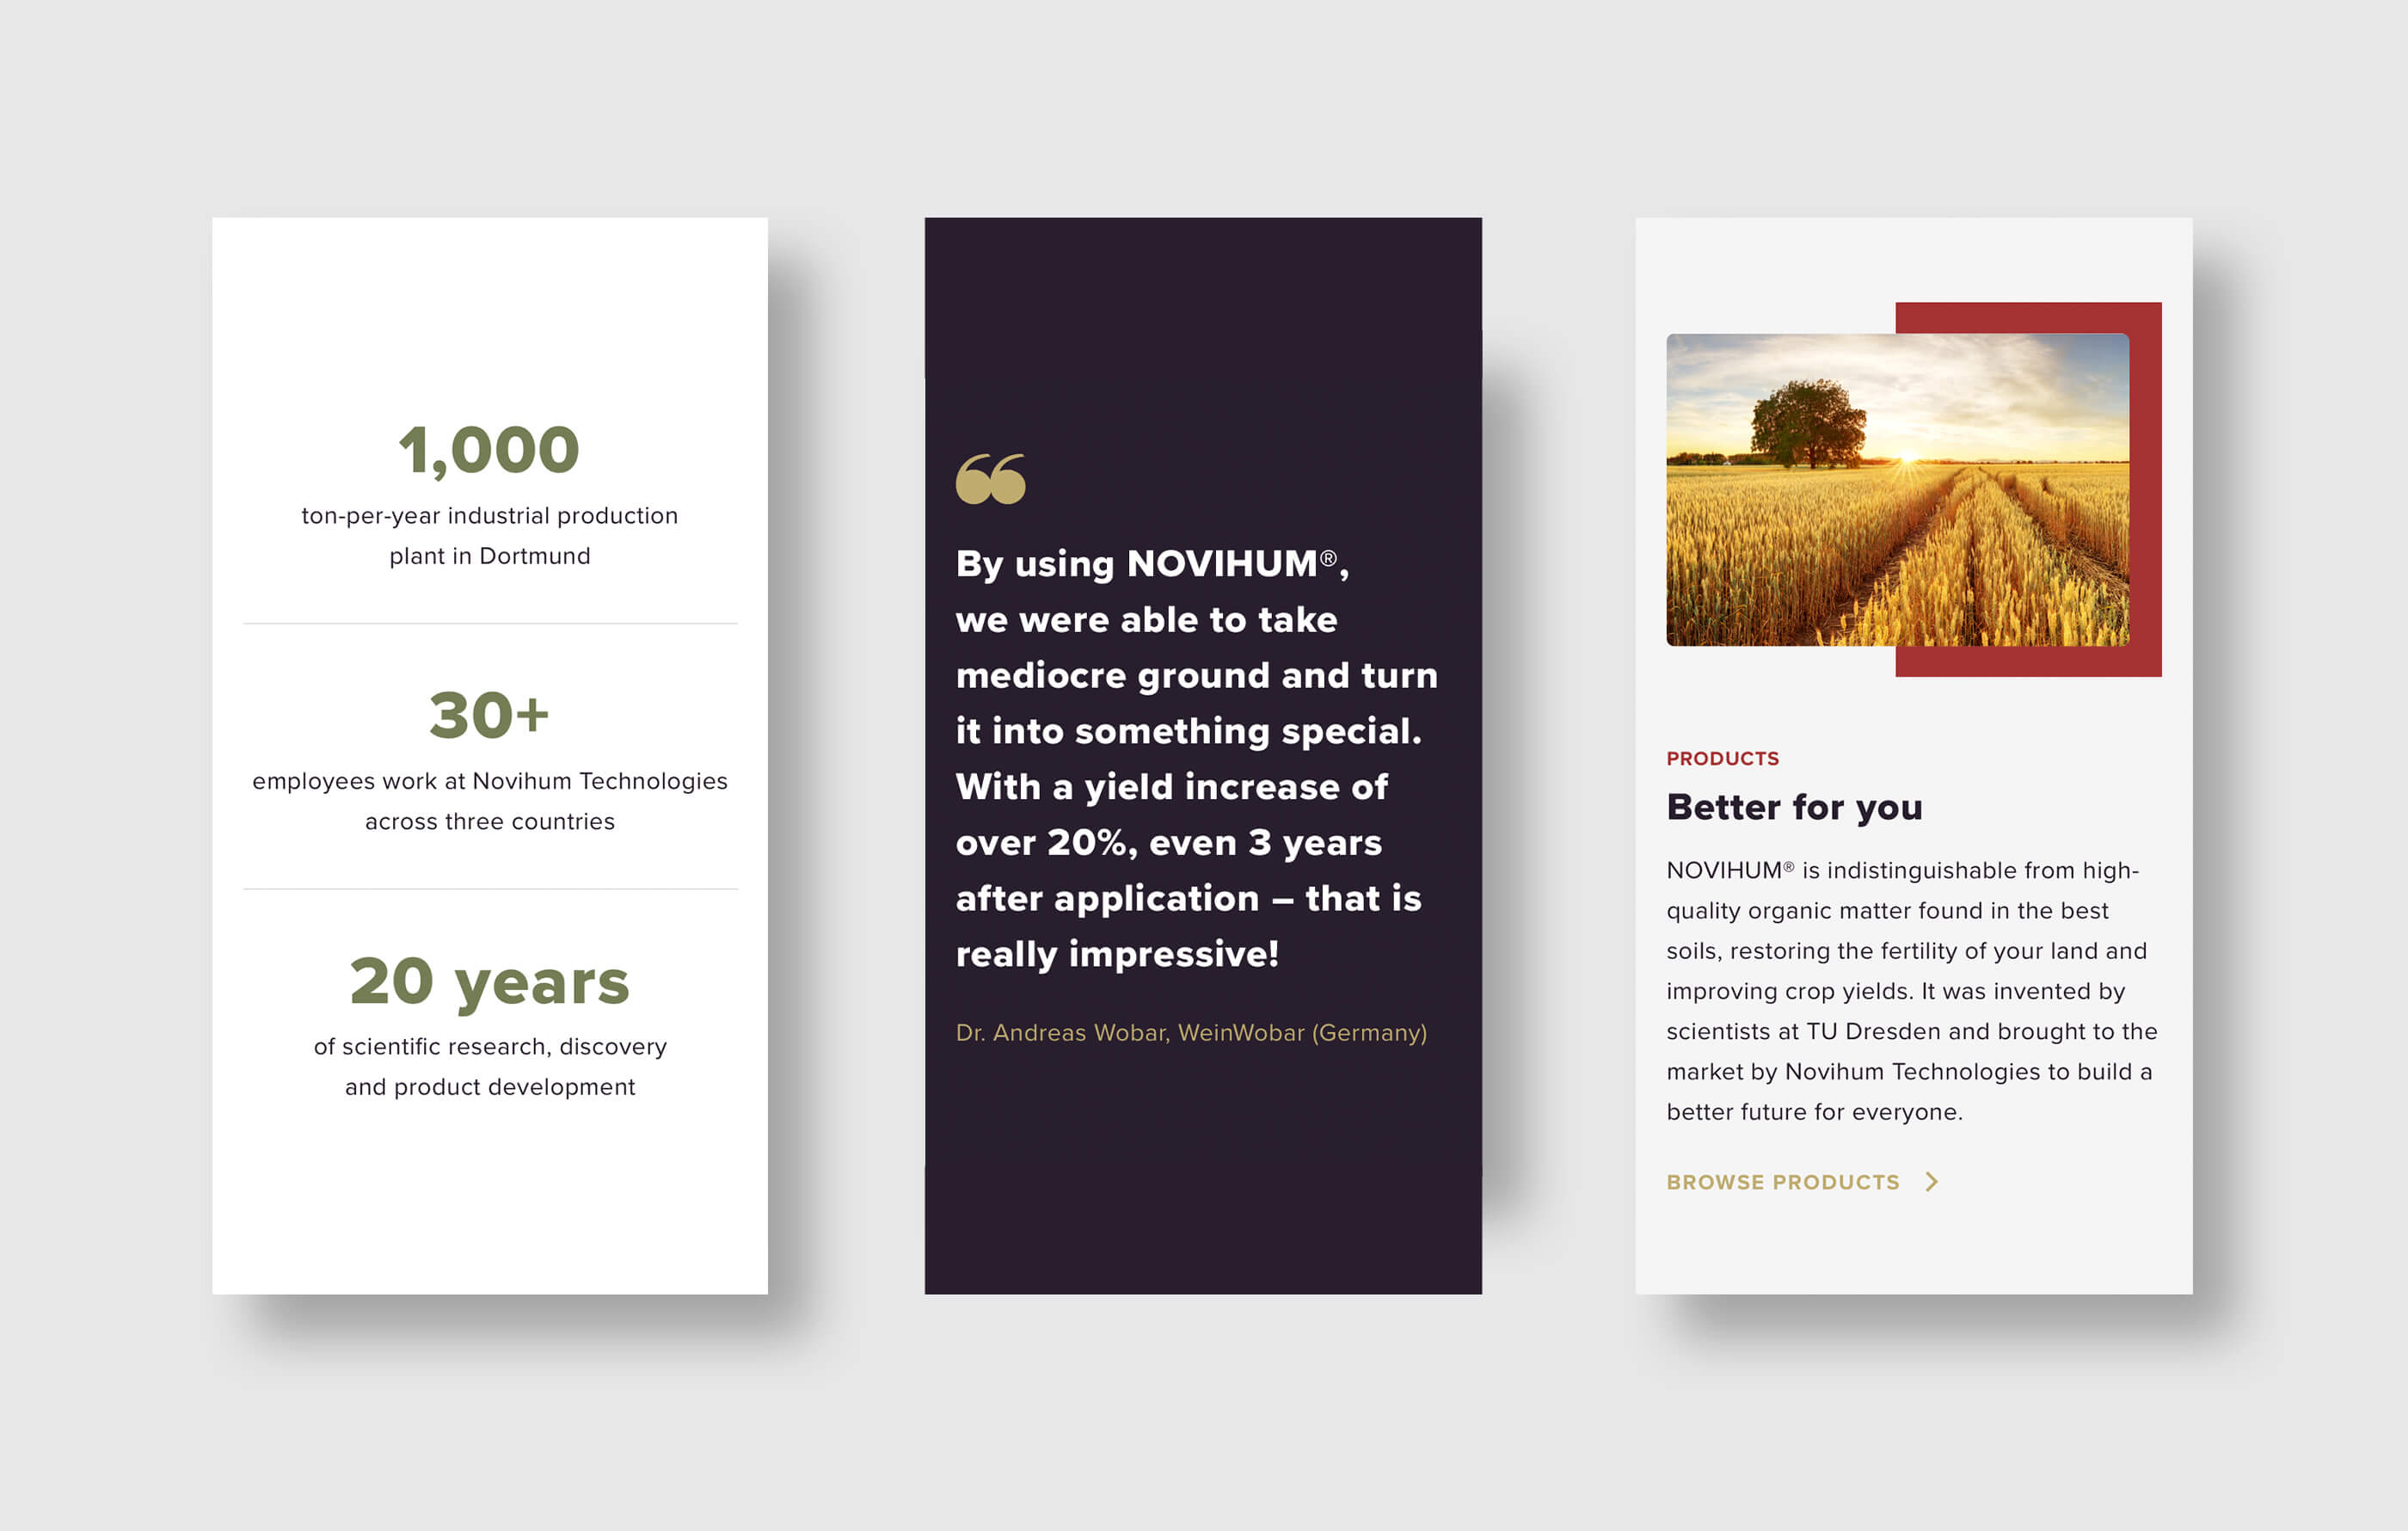 Three mobile phone mockups, featuring top level statistics in olive green, a customer quote in white text and gold quotation marks on a dark background, and an image of a field at dusk